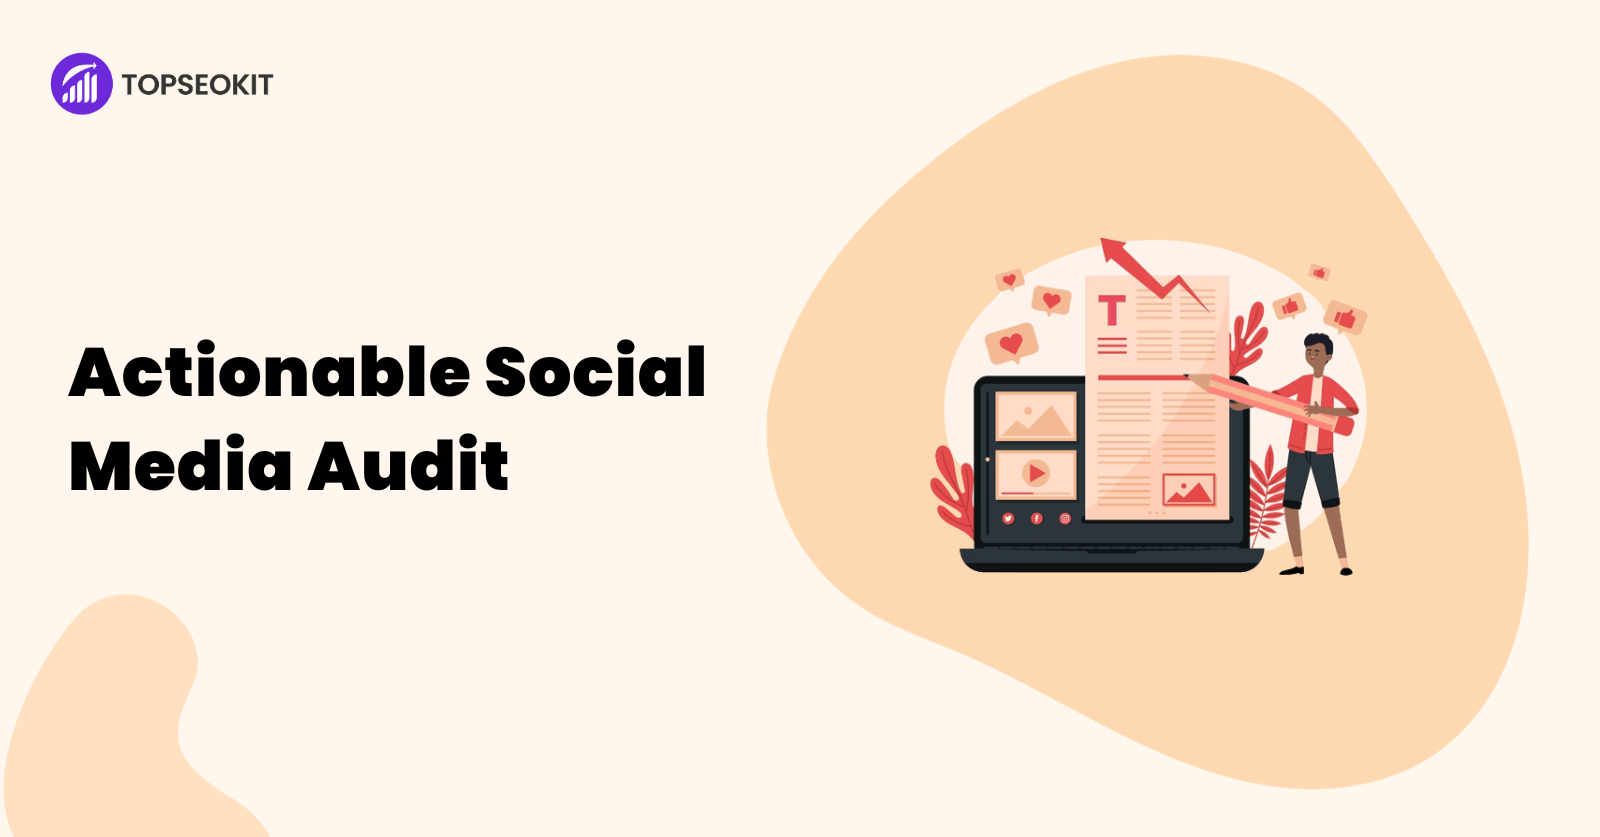 The Checklist You Need for an Actionable Social Media Audit